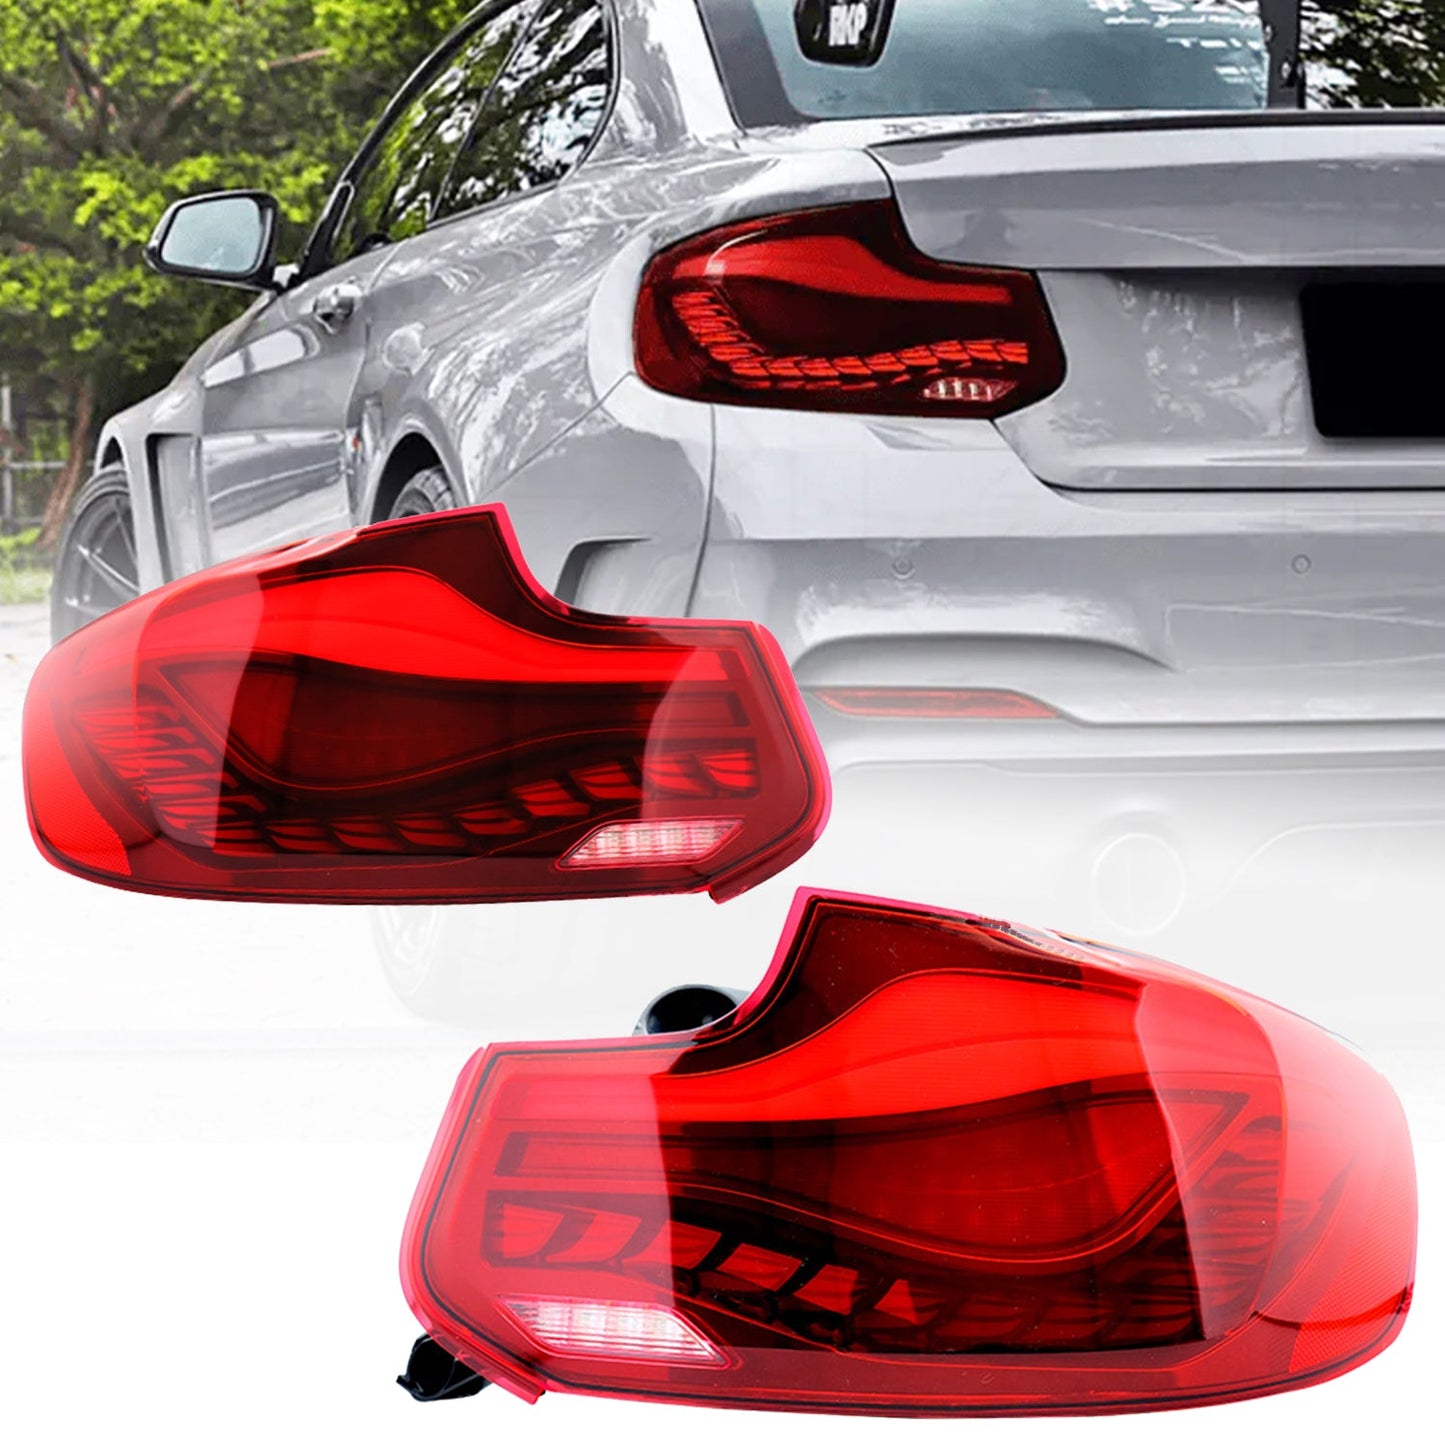 Full LED Tail Lights Assembly For BMW 2 series F22 F23 F87 2014-2020,Red